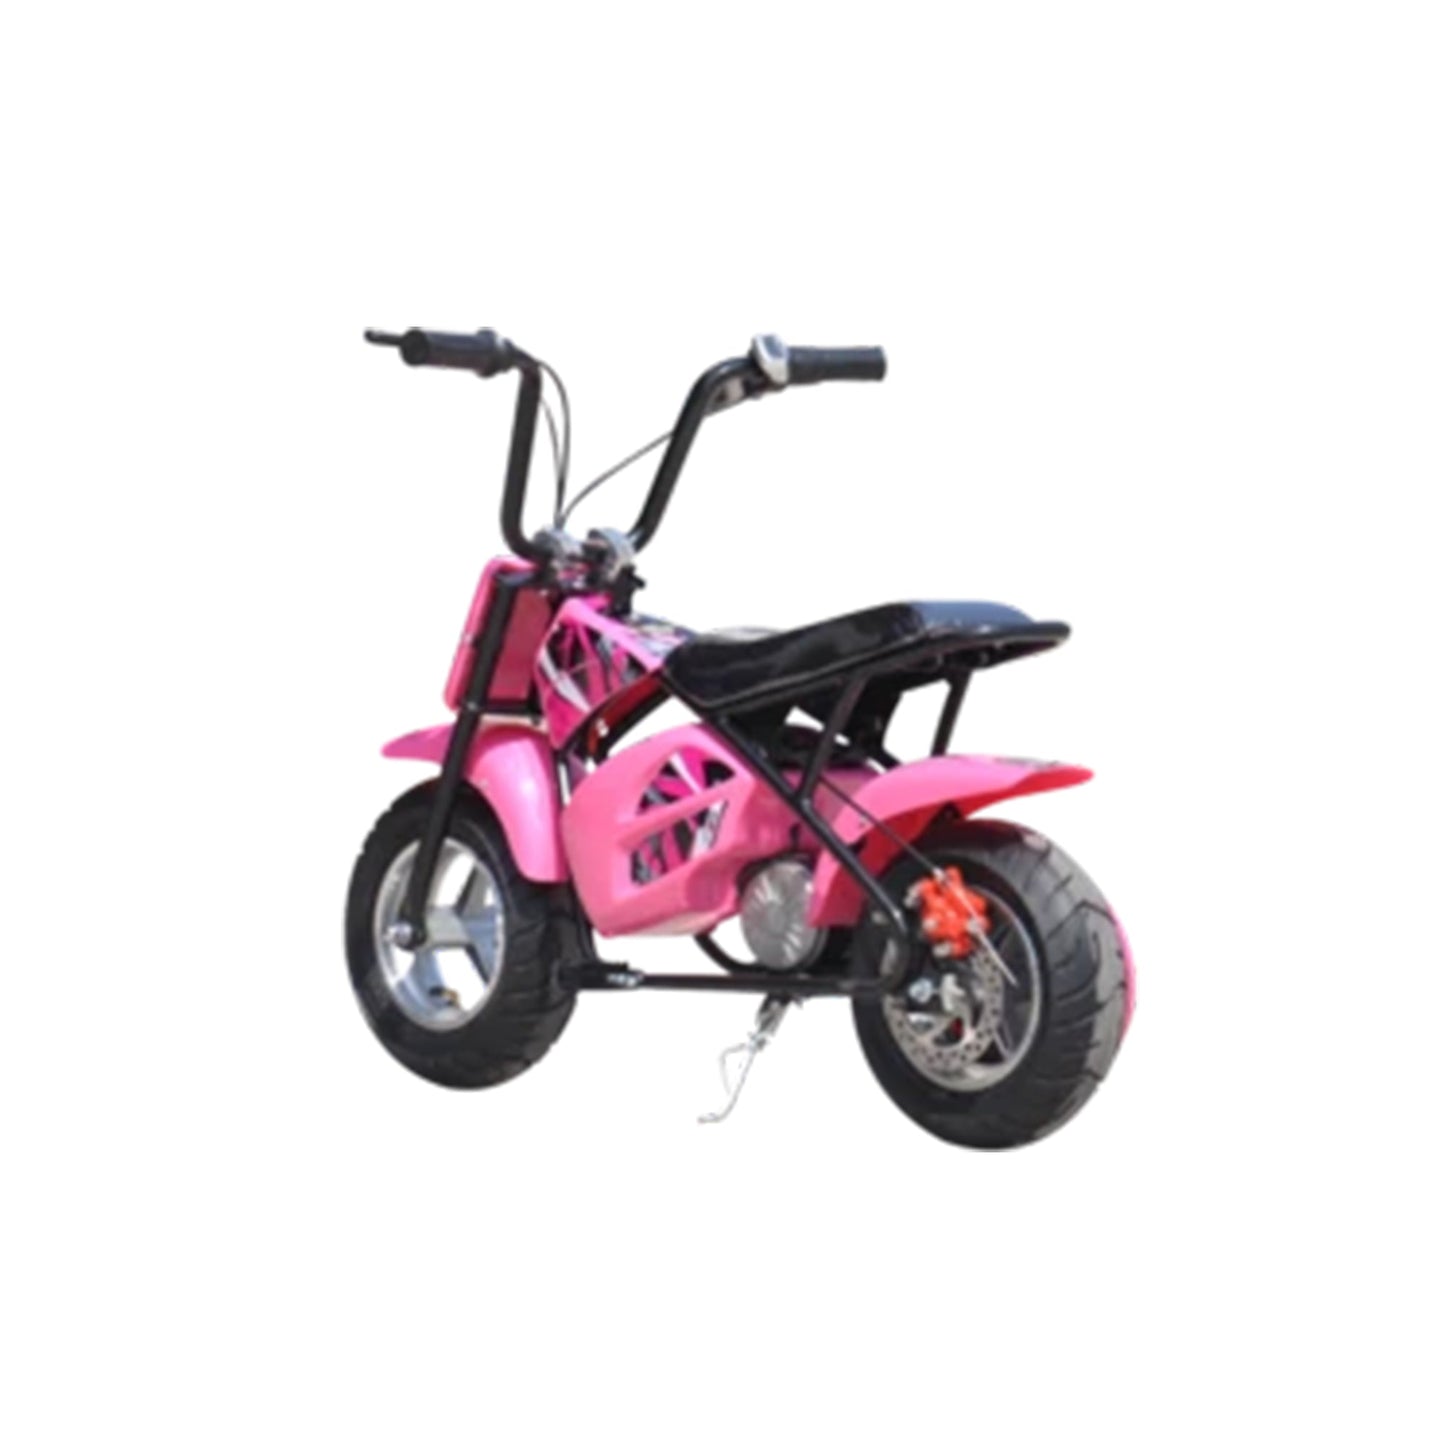 "Small Pink Mini Dirtbike Electric Ride for Kids 250 Watt 12 Volt with Stabilisers on White Background"
